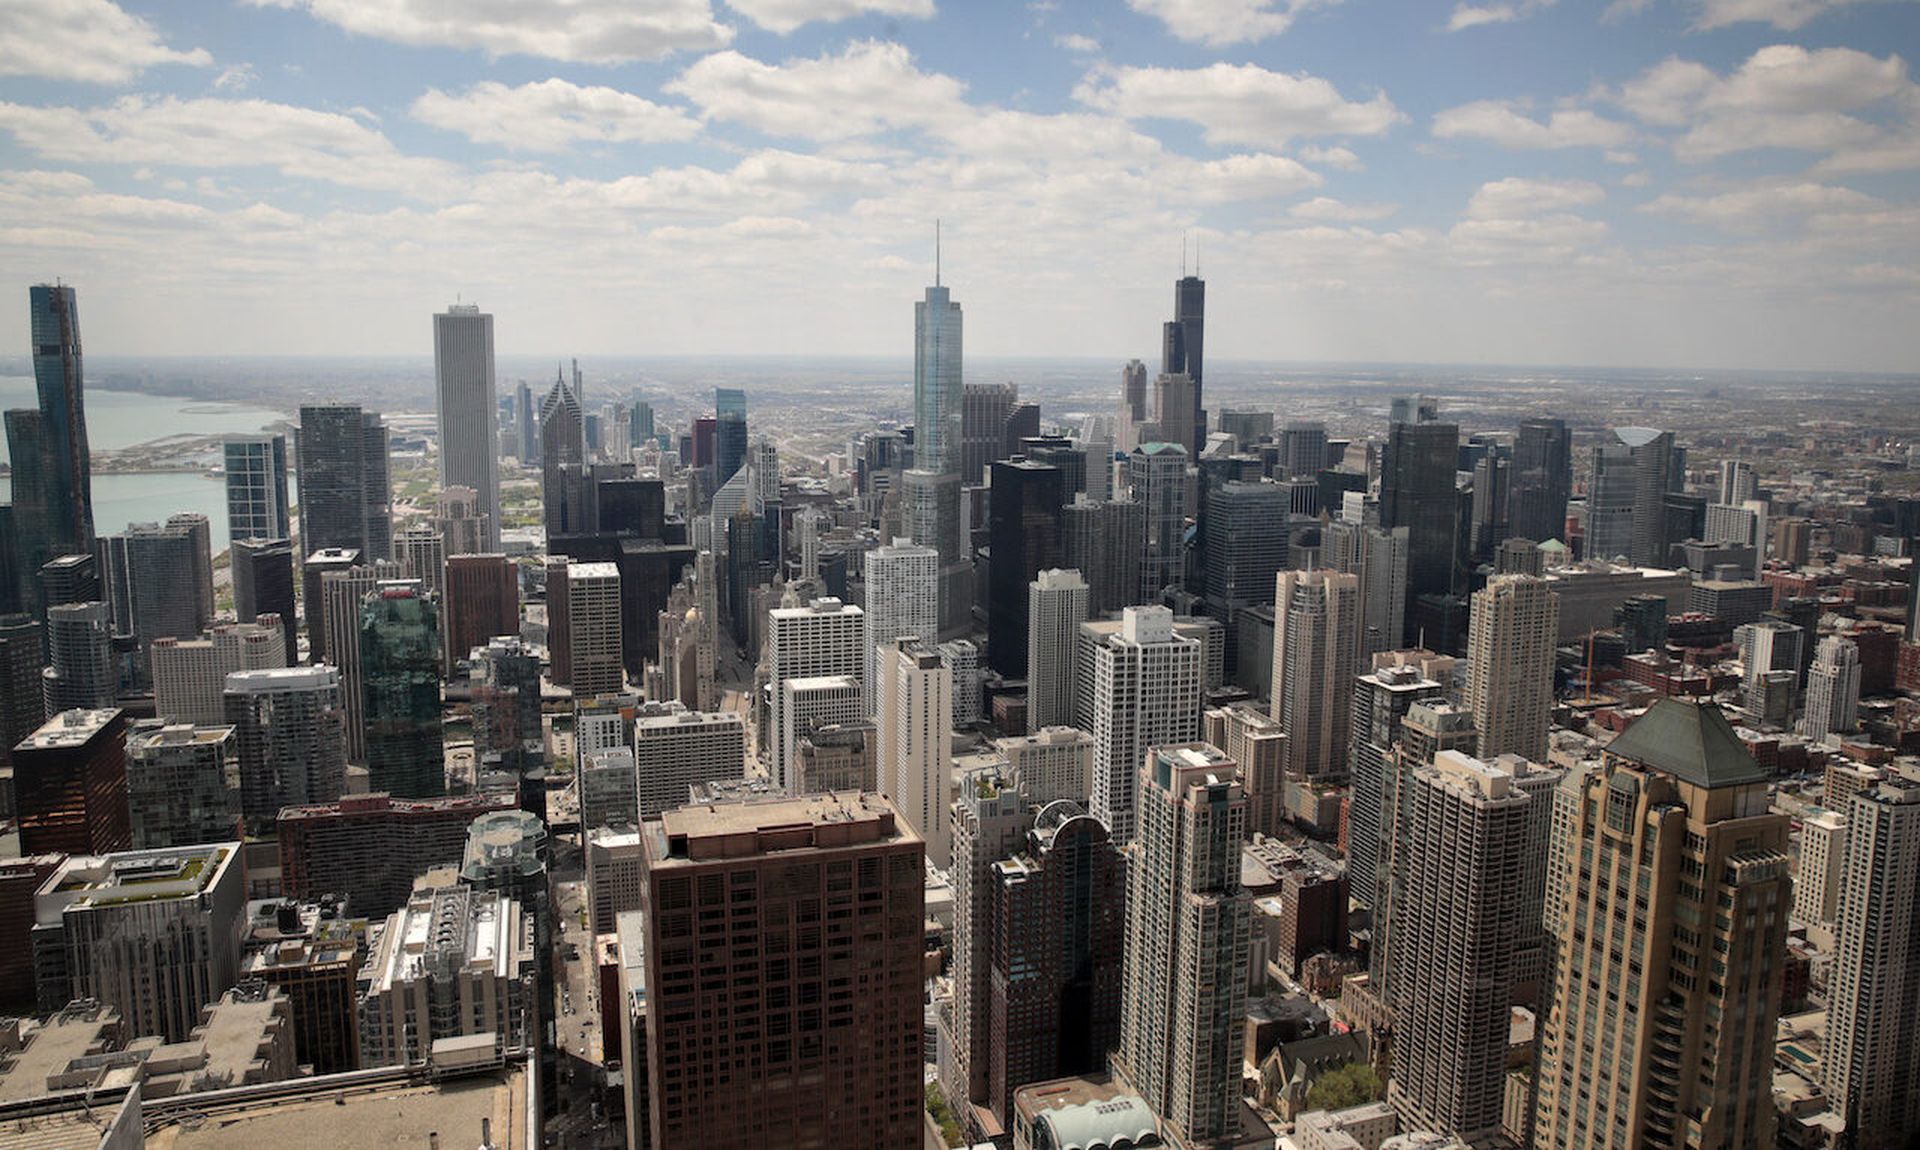 A view from the 360 Chicago observation deck shows the city skyline. (Photo by Scott Olson/Getty Images)